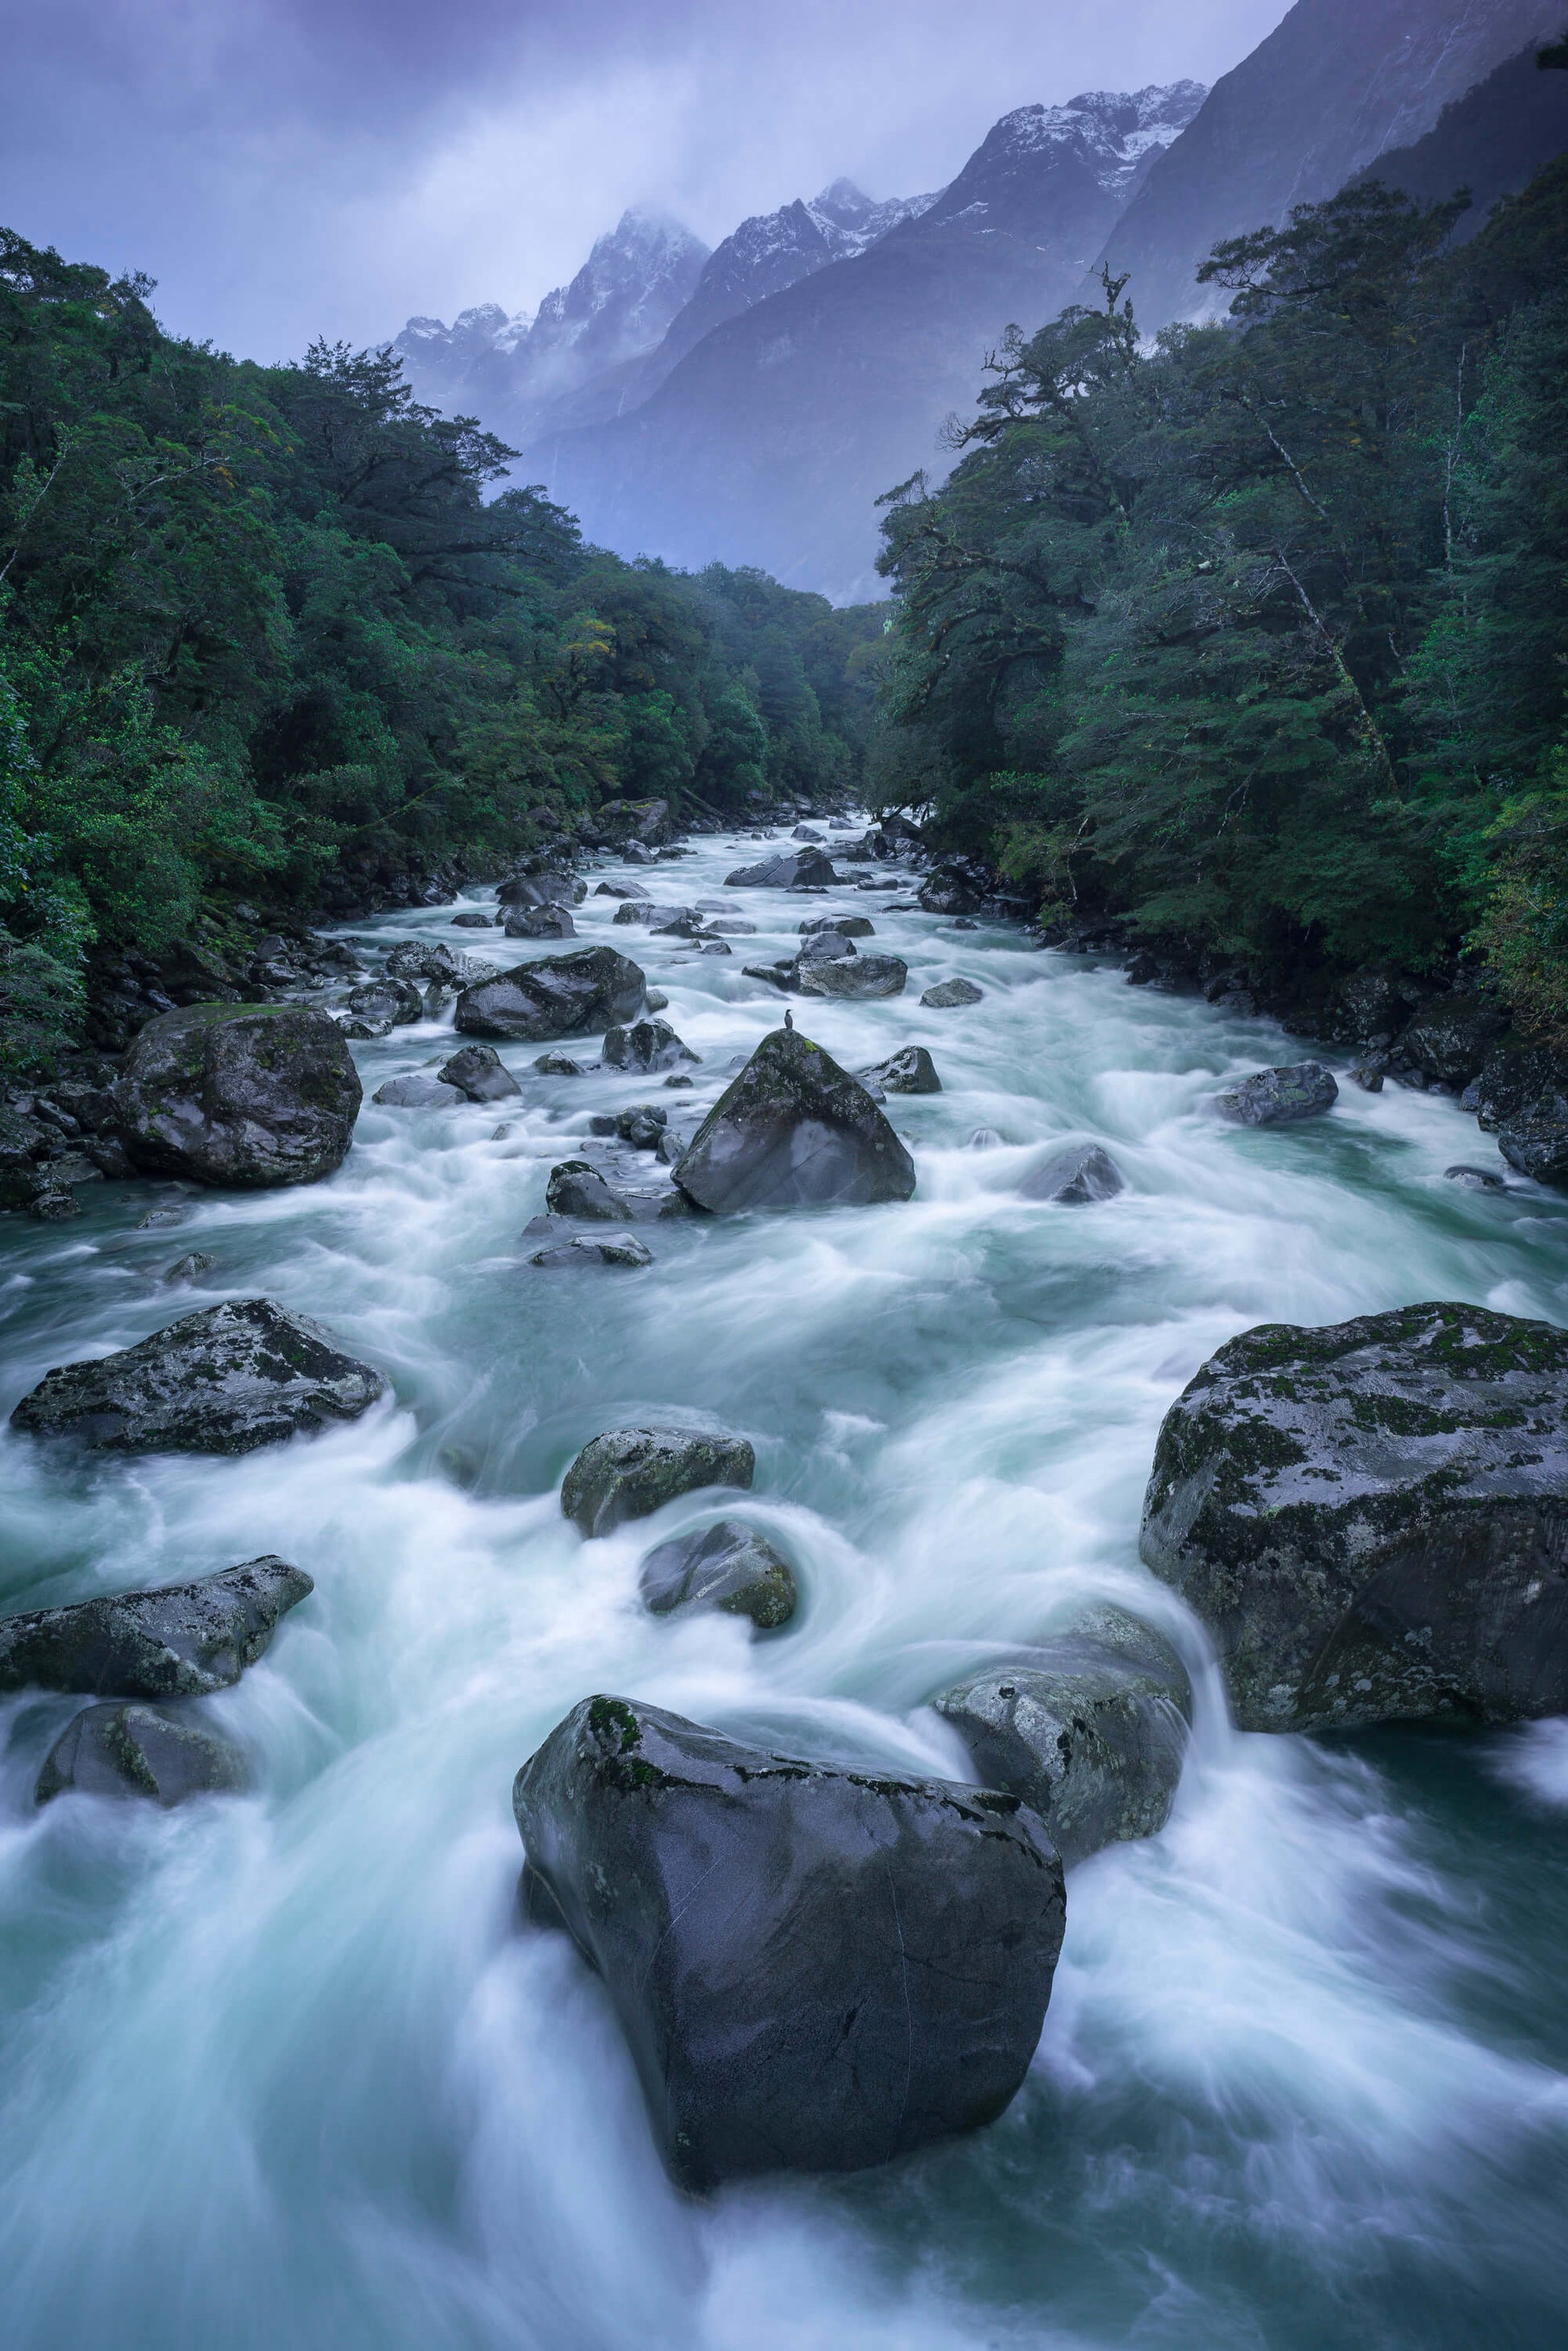 Rainy river in the high country of New Zealand with a bird perched on one of the river's rocks